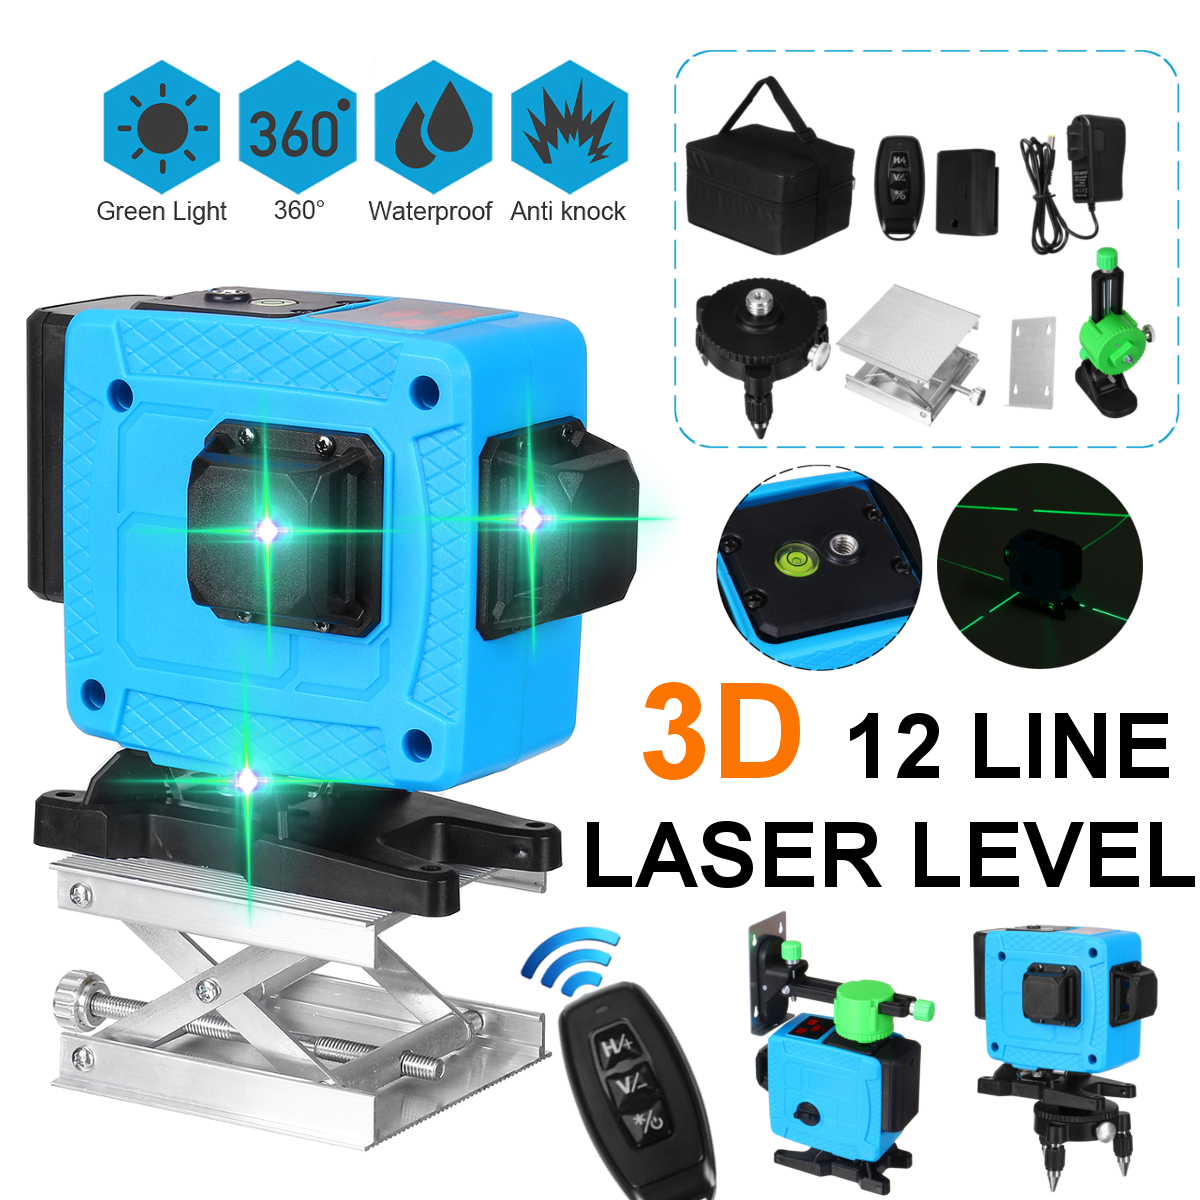 12-Line-Laser-Level-Green-Light-Self-Leveling-Cross-360deg-Rotary-Measure-with-Remote-1740211-1